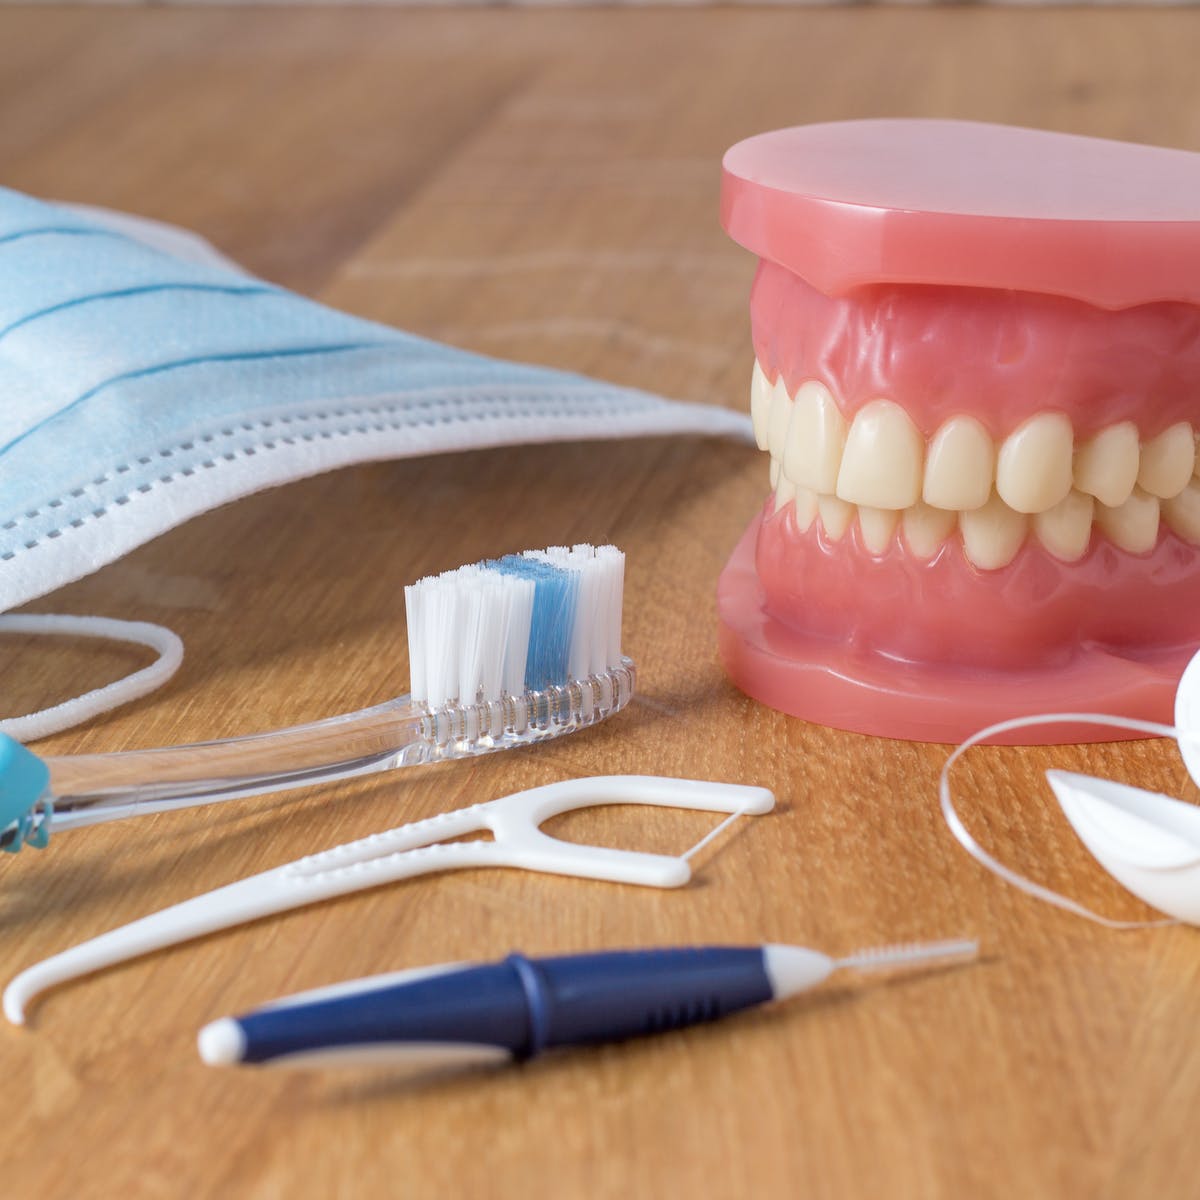 1. From the moment you start growing teeth, you commence a daily routine of ensuring your dental health is not compromised. For most people, 2ce a day everyday, a dental health routine is followed for maximum protection & as preventive measure to but dental health problems at bay